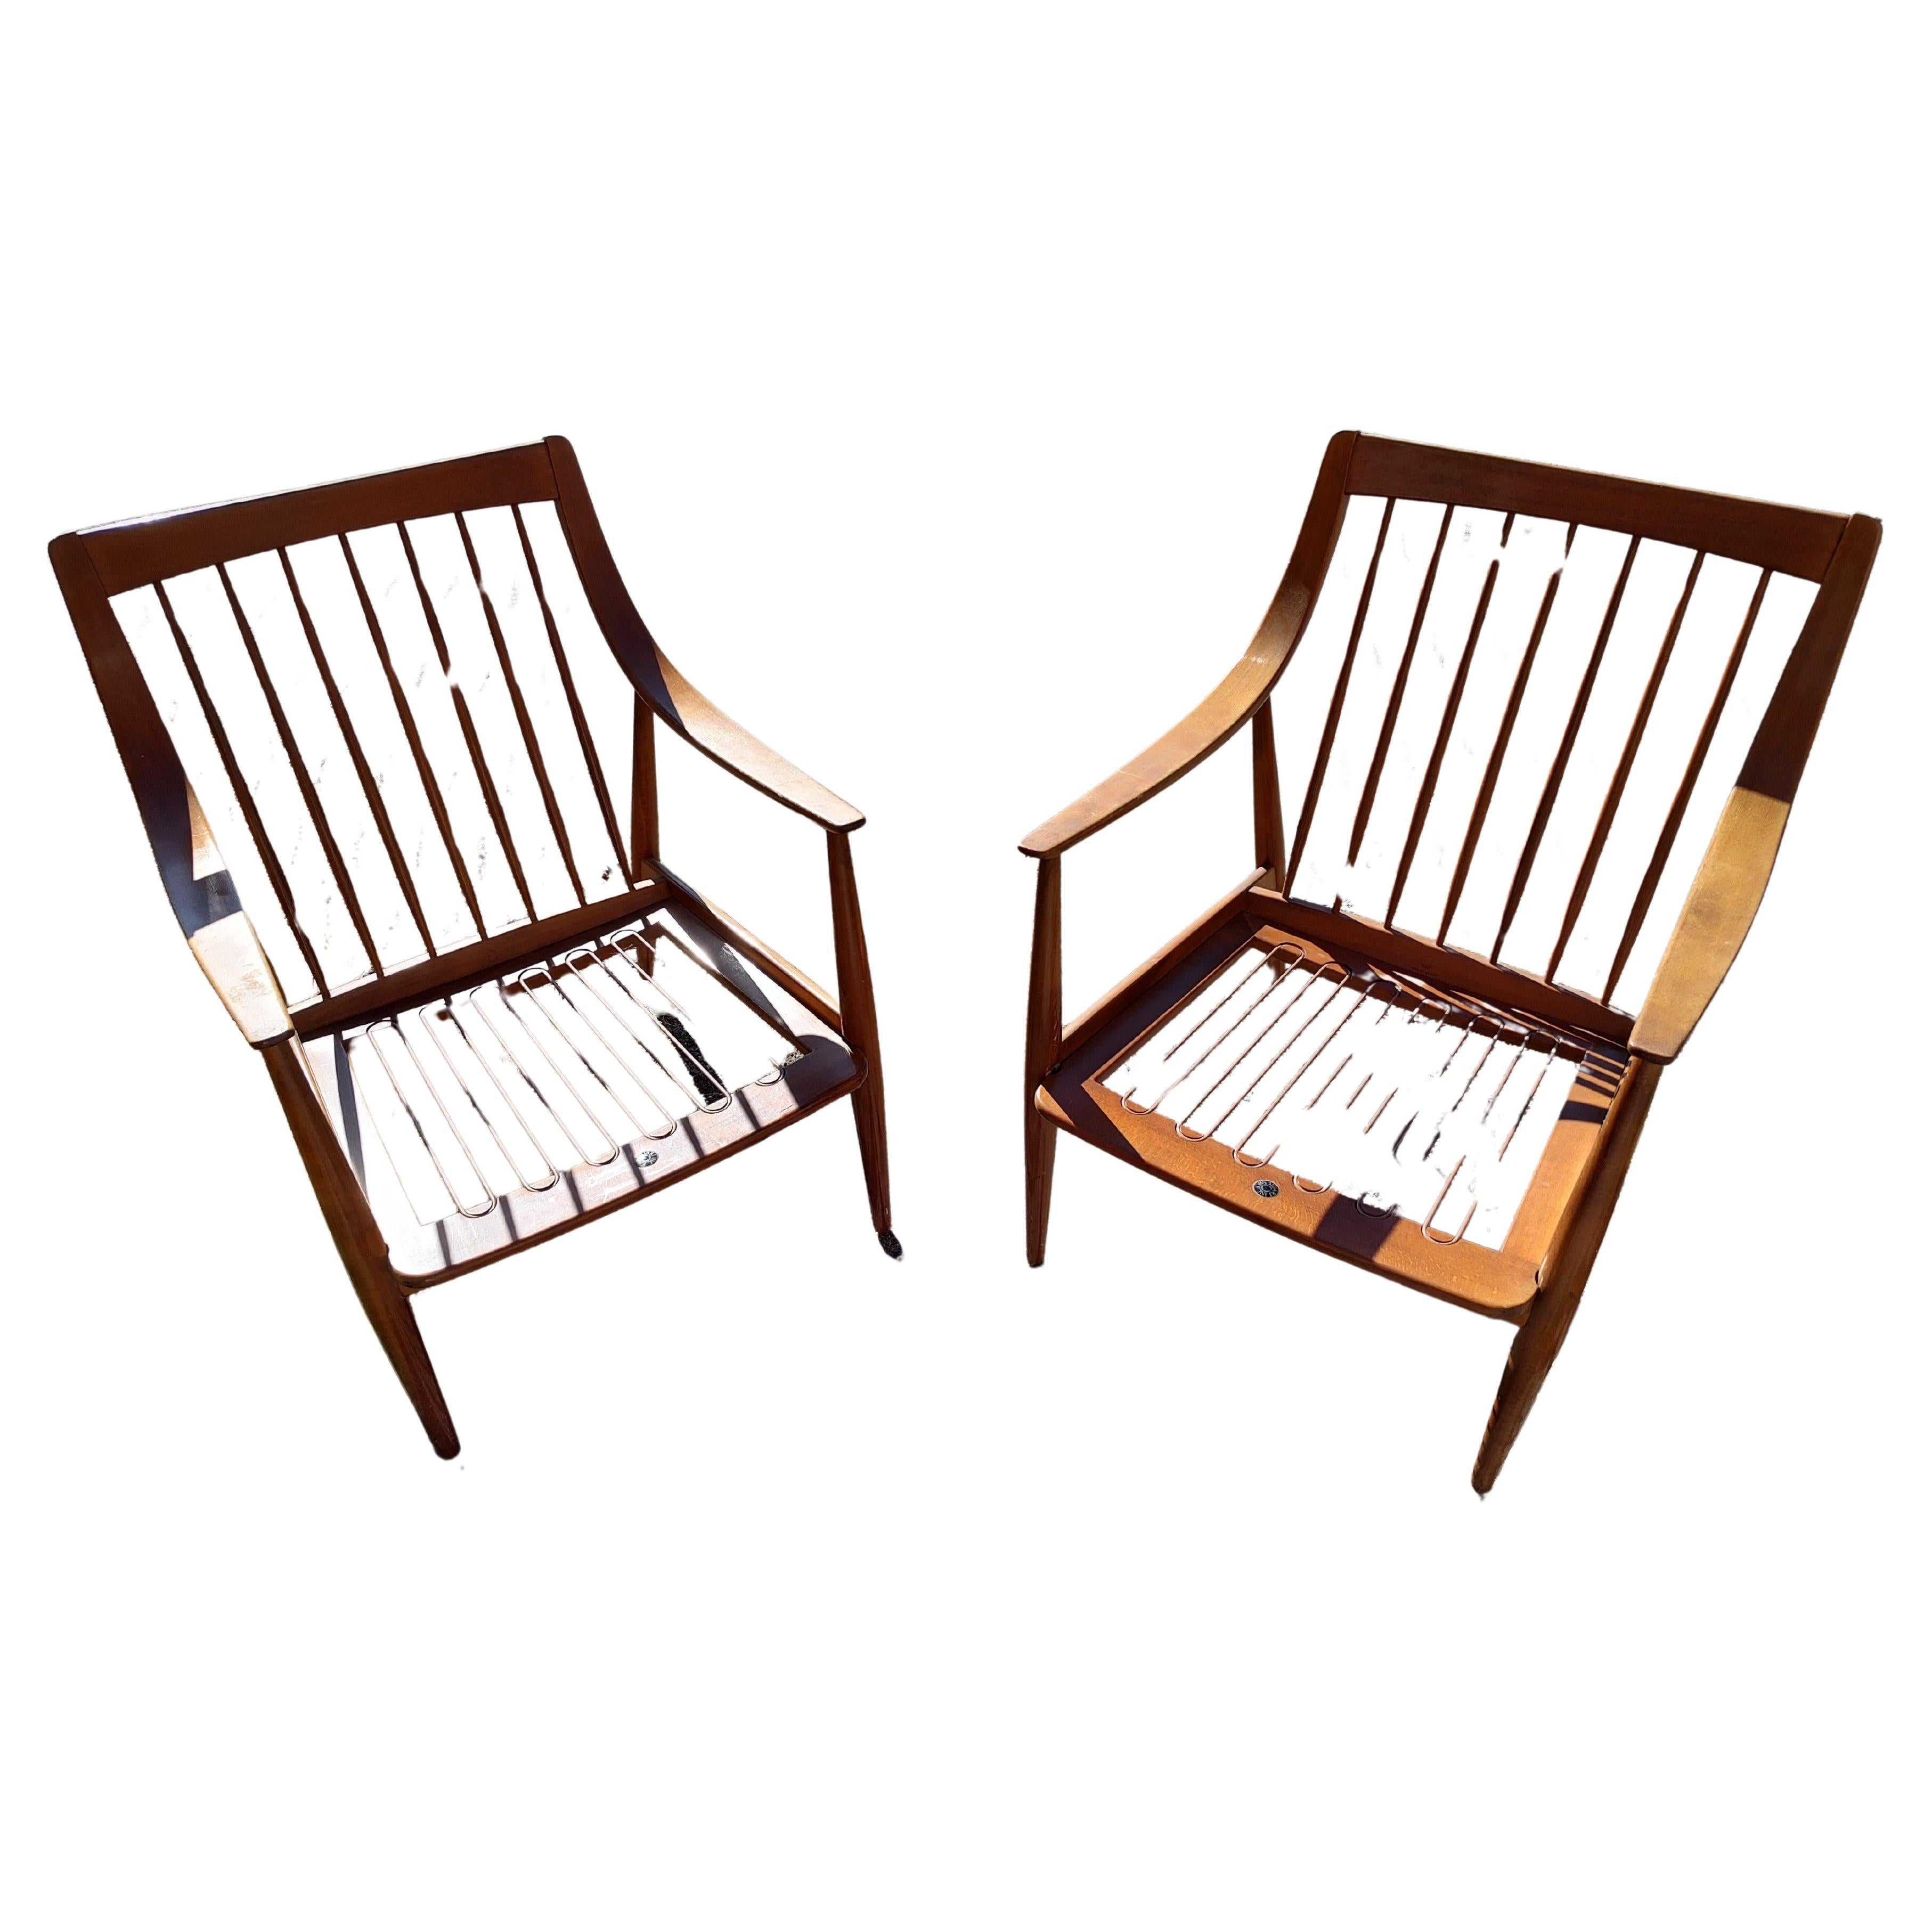 Fabric Pair of Mid-Century Modern Lounge Chairs by Peter Hvidt & Olga Molgaard Neilson  For Sale